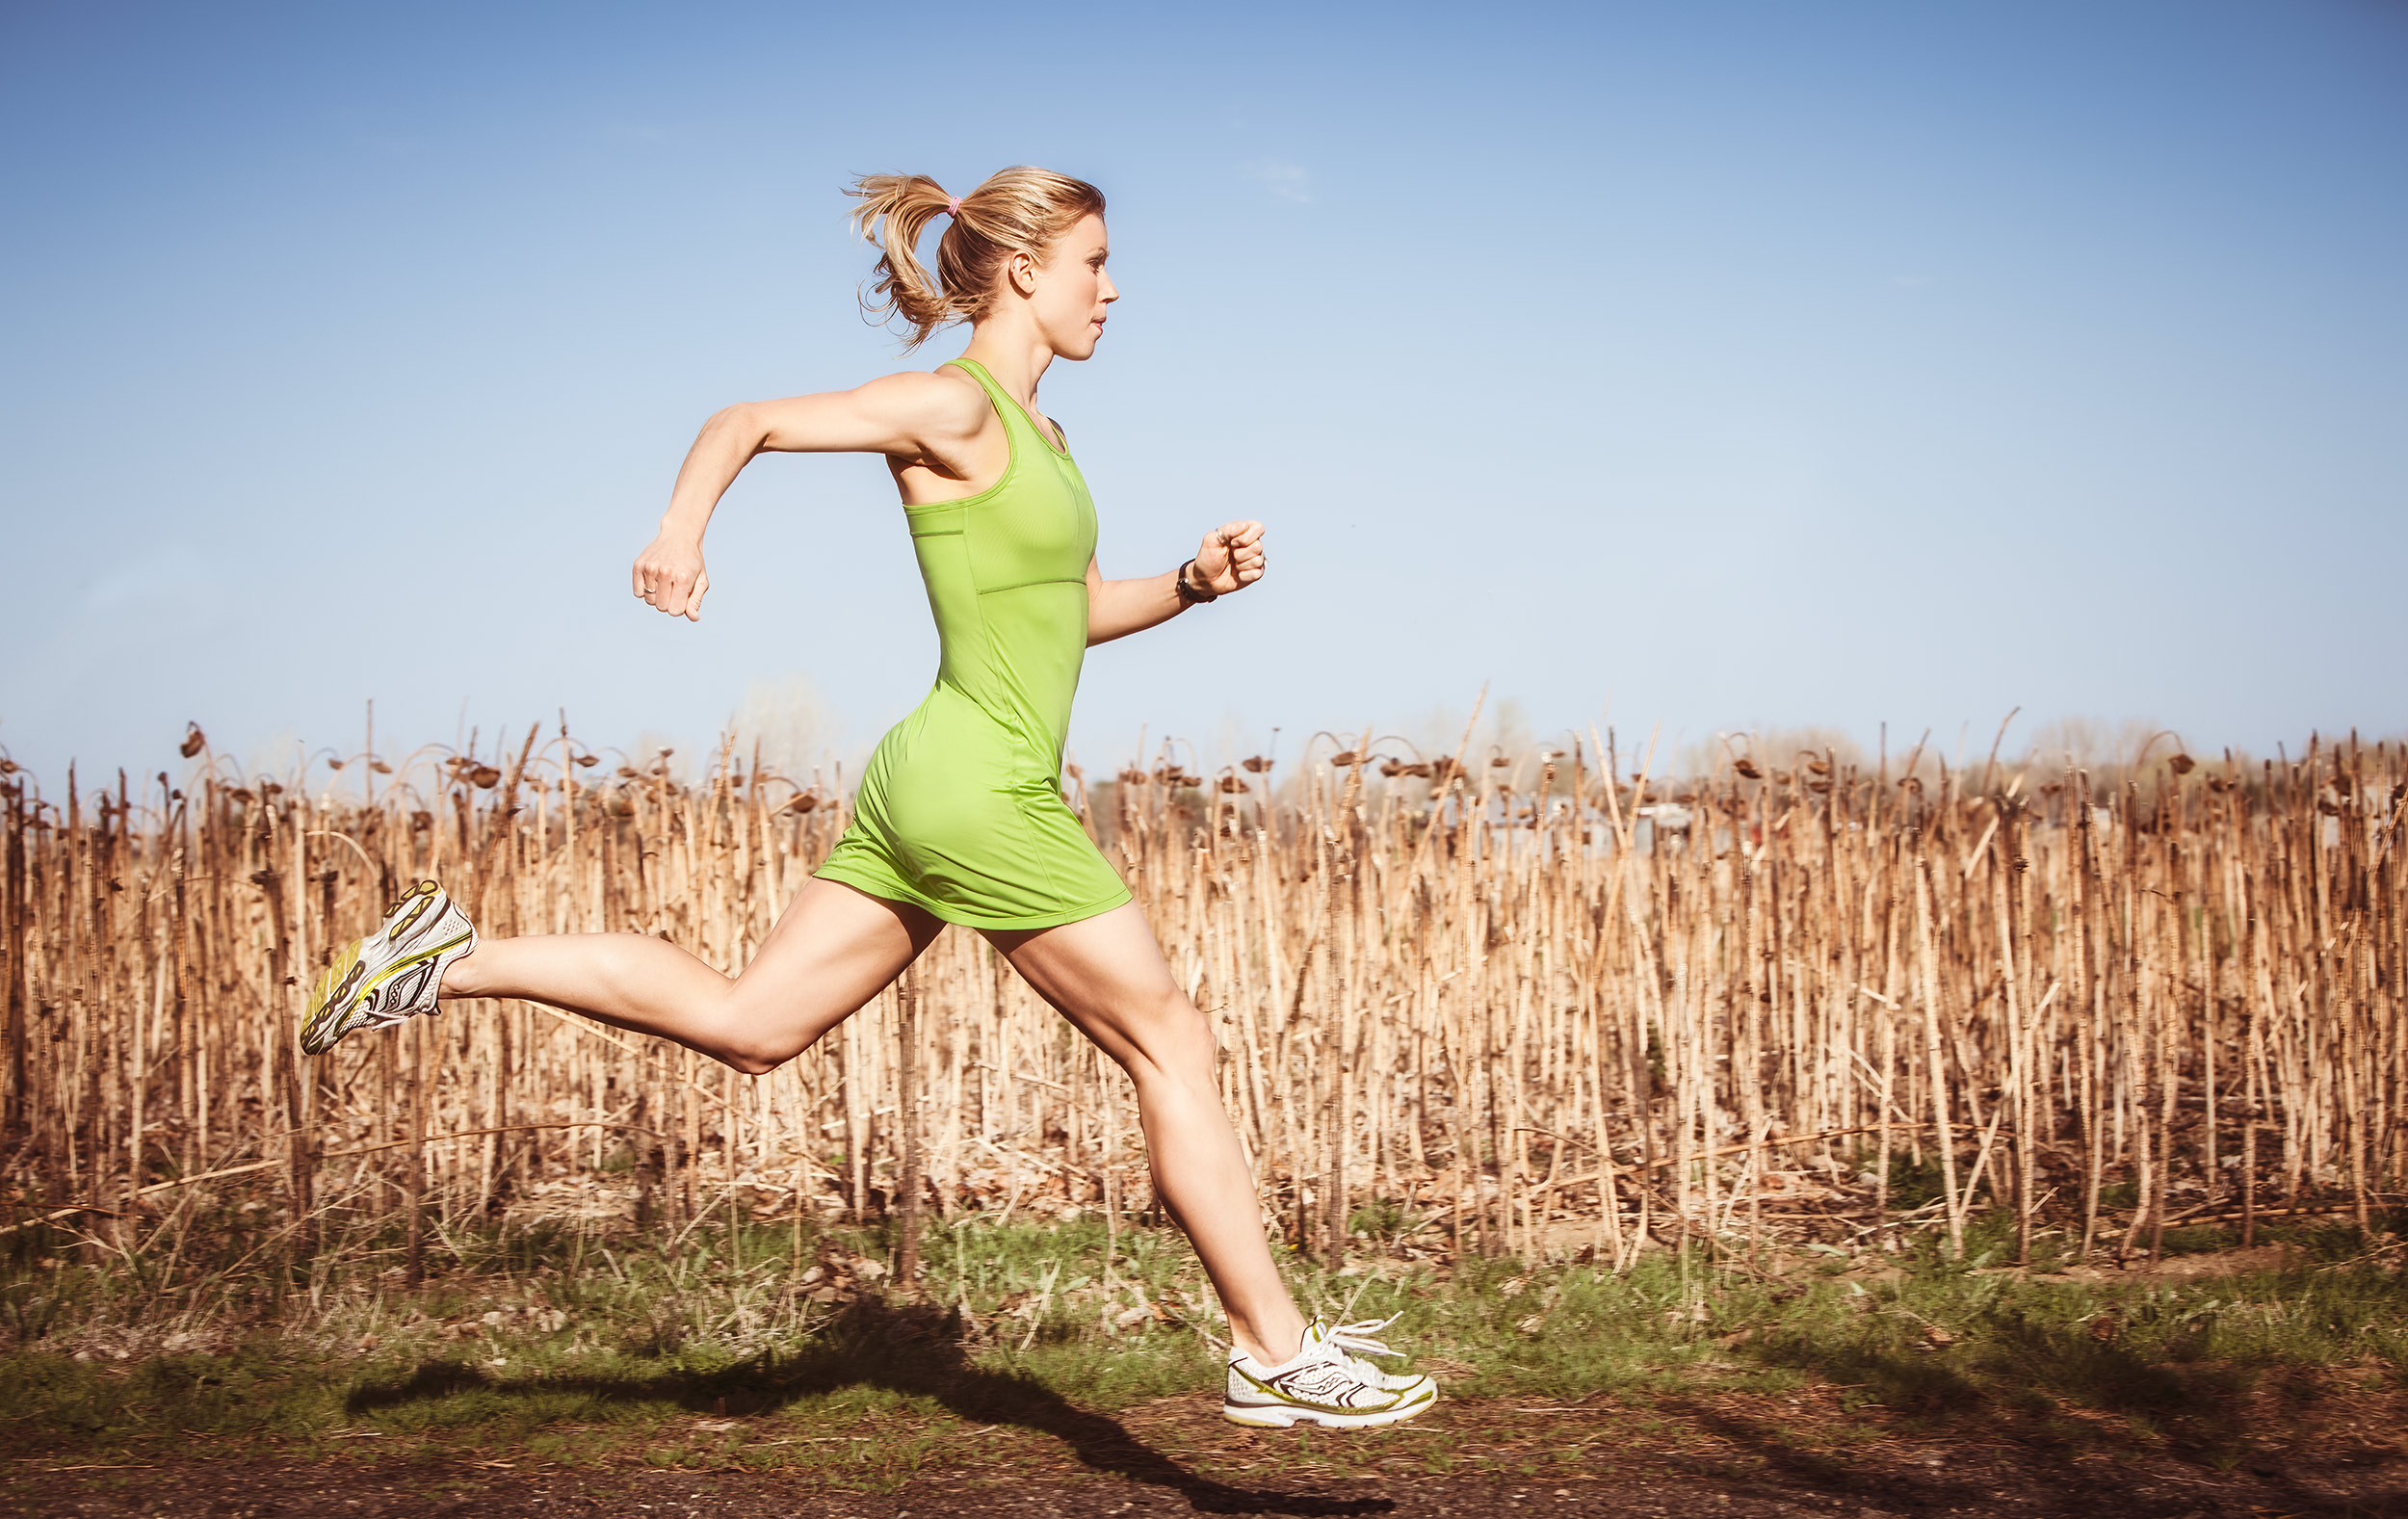 Woman Trail Running in Corn Field during Summer